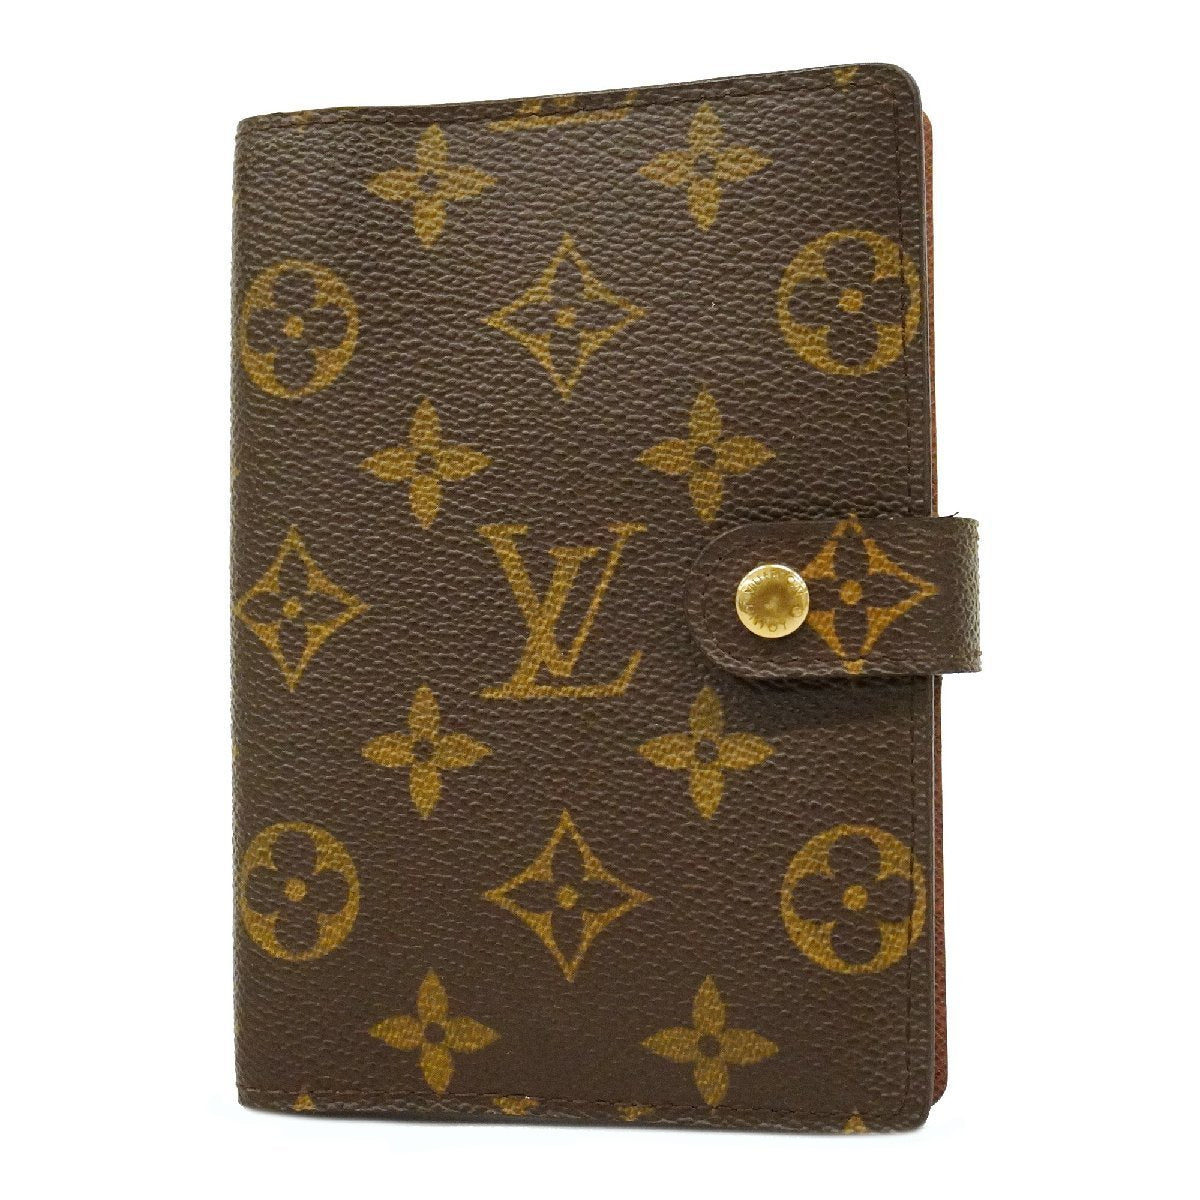 How to Change Your Louis Vuitton PM Agenda Rings 